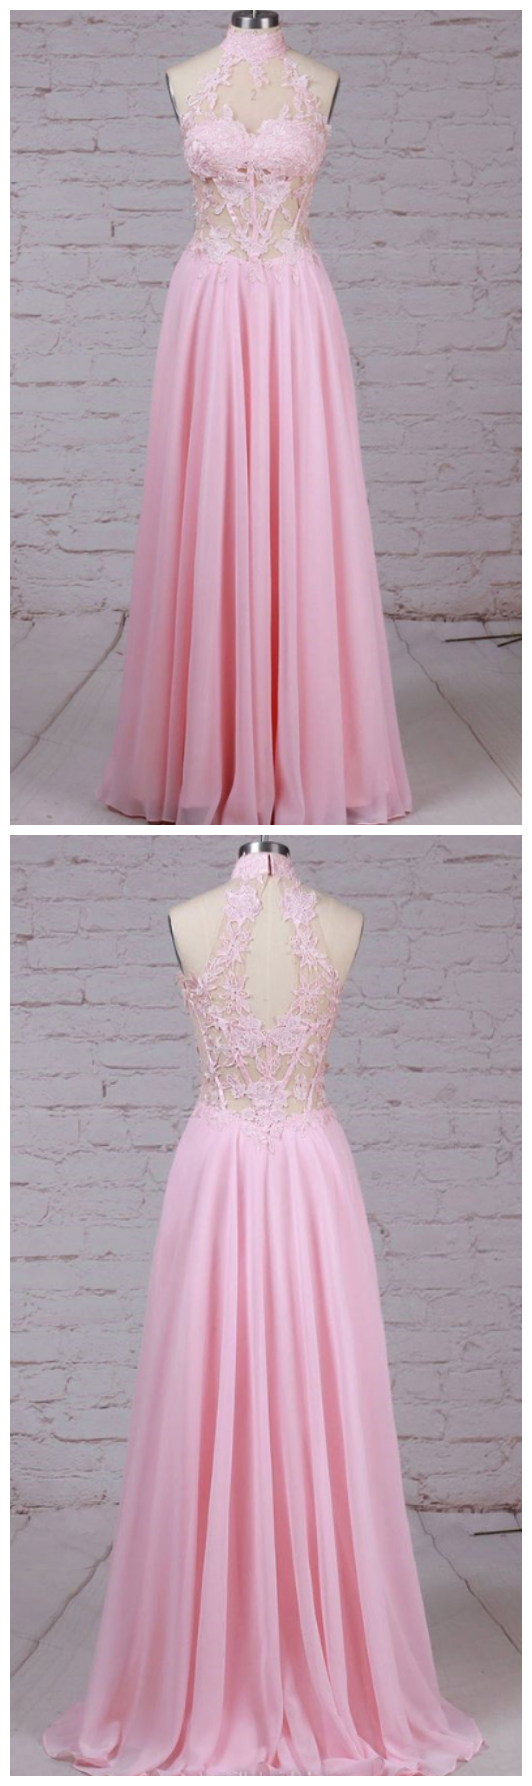 Chiffon Evening Gowns,sexy Ball Gowns, Custom Made Prom, Fashion, Tulle High Neck Floor-length A-line Appliques Lace Prom Dresses